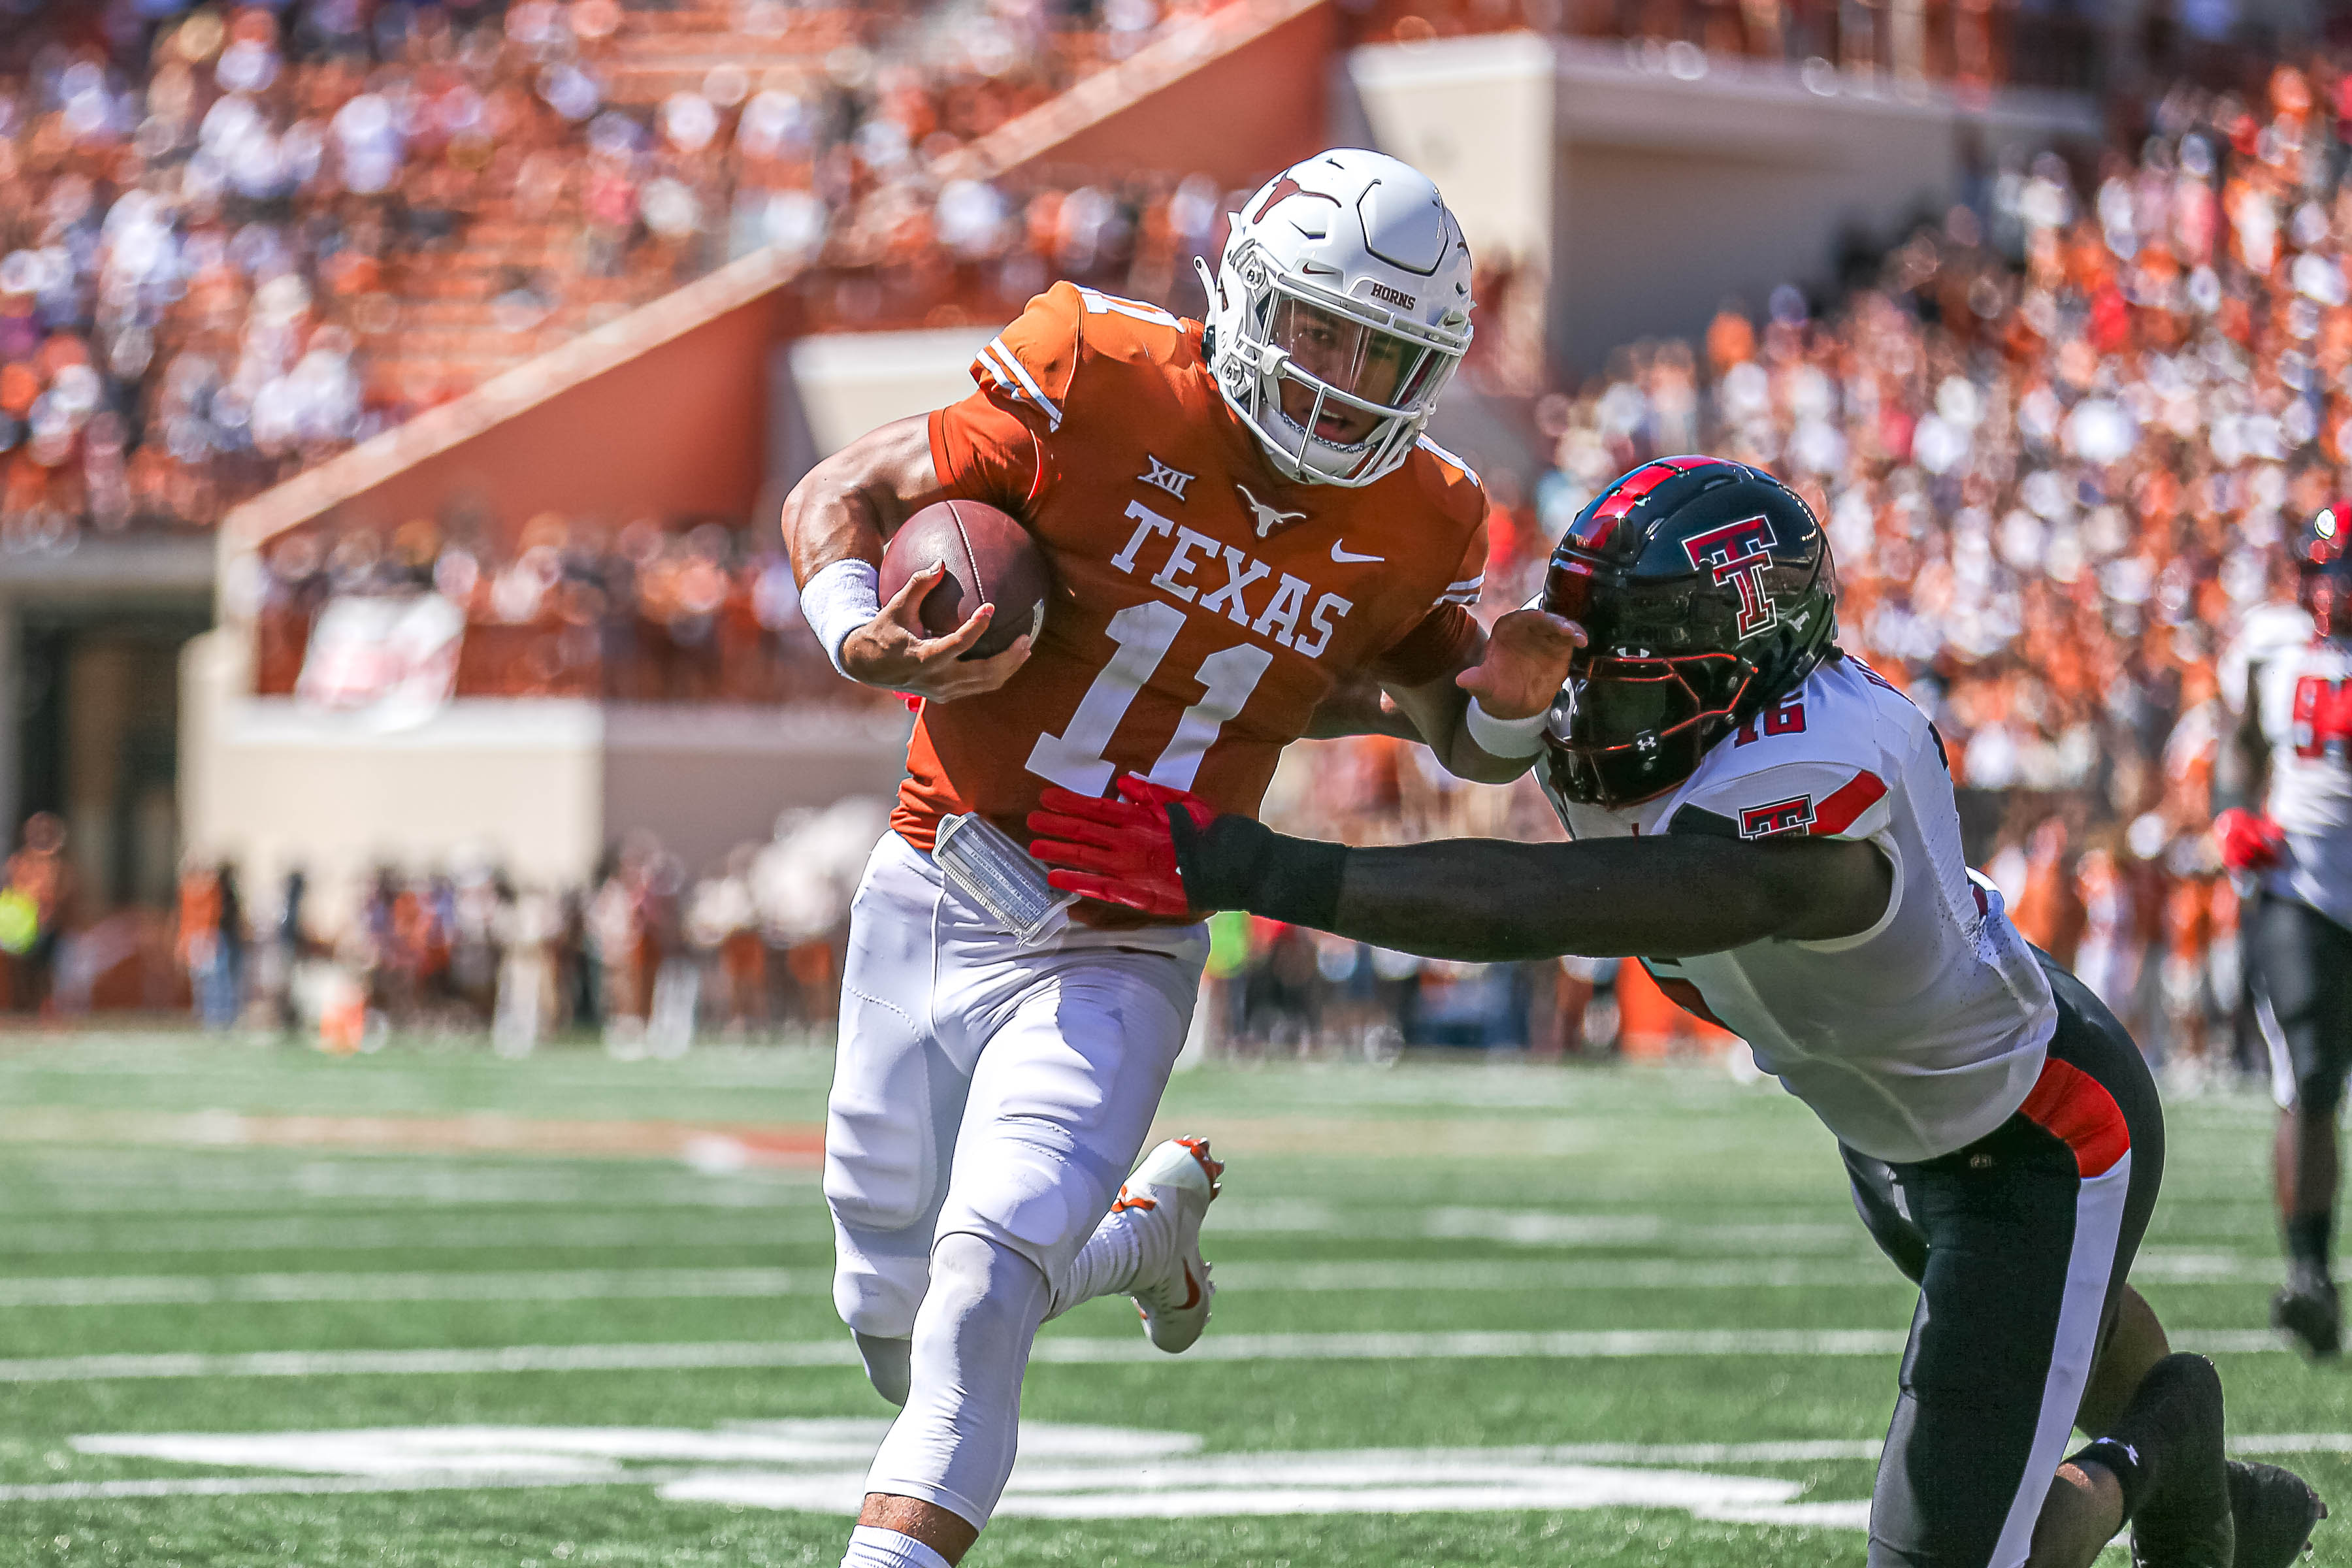 Don and Carlos spend a short amount of time chatting about Texas Tech's 70-35 loss to Texas